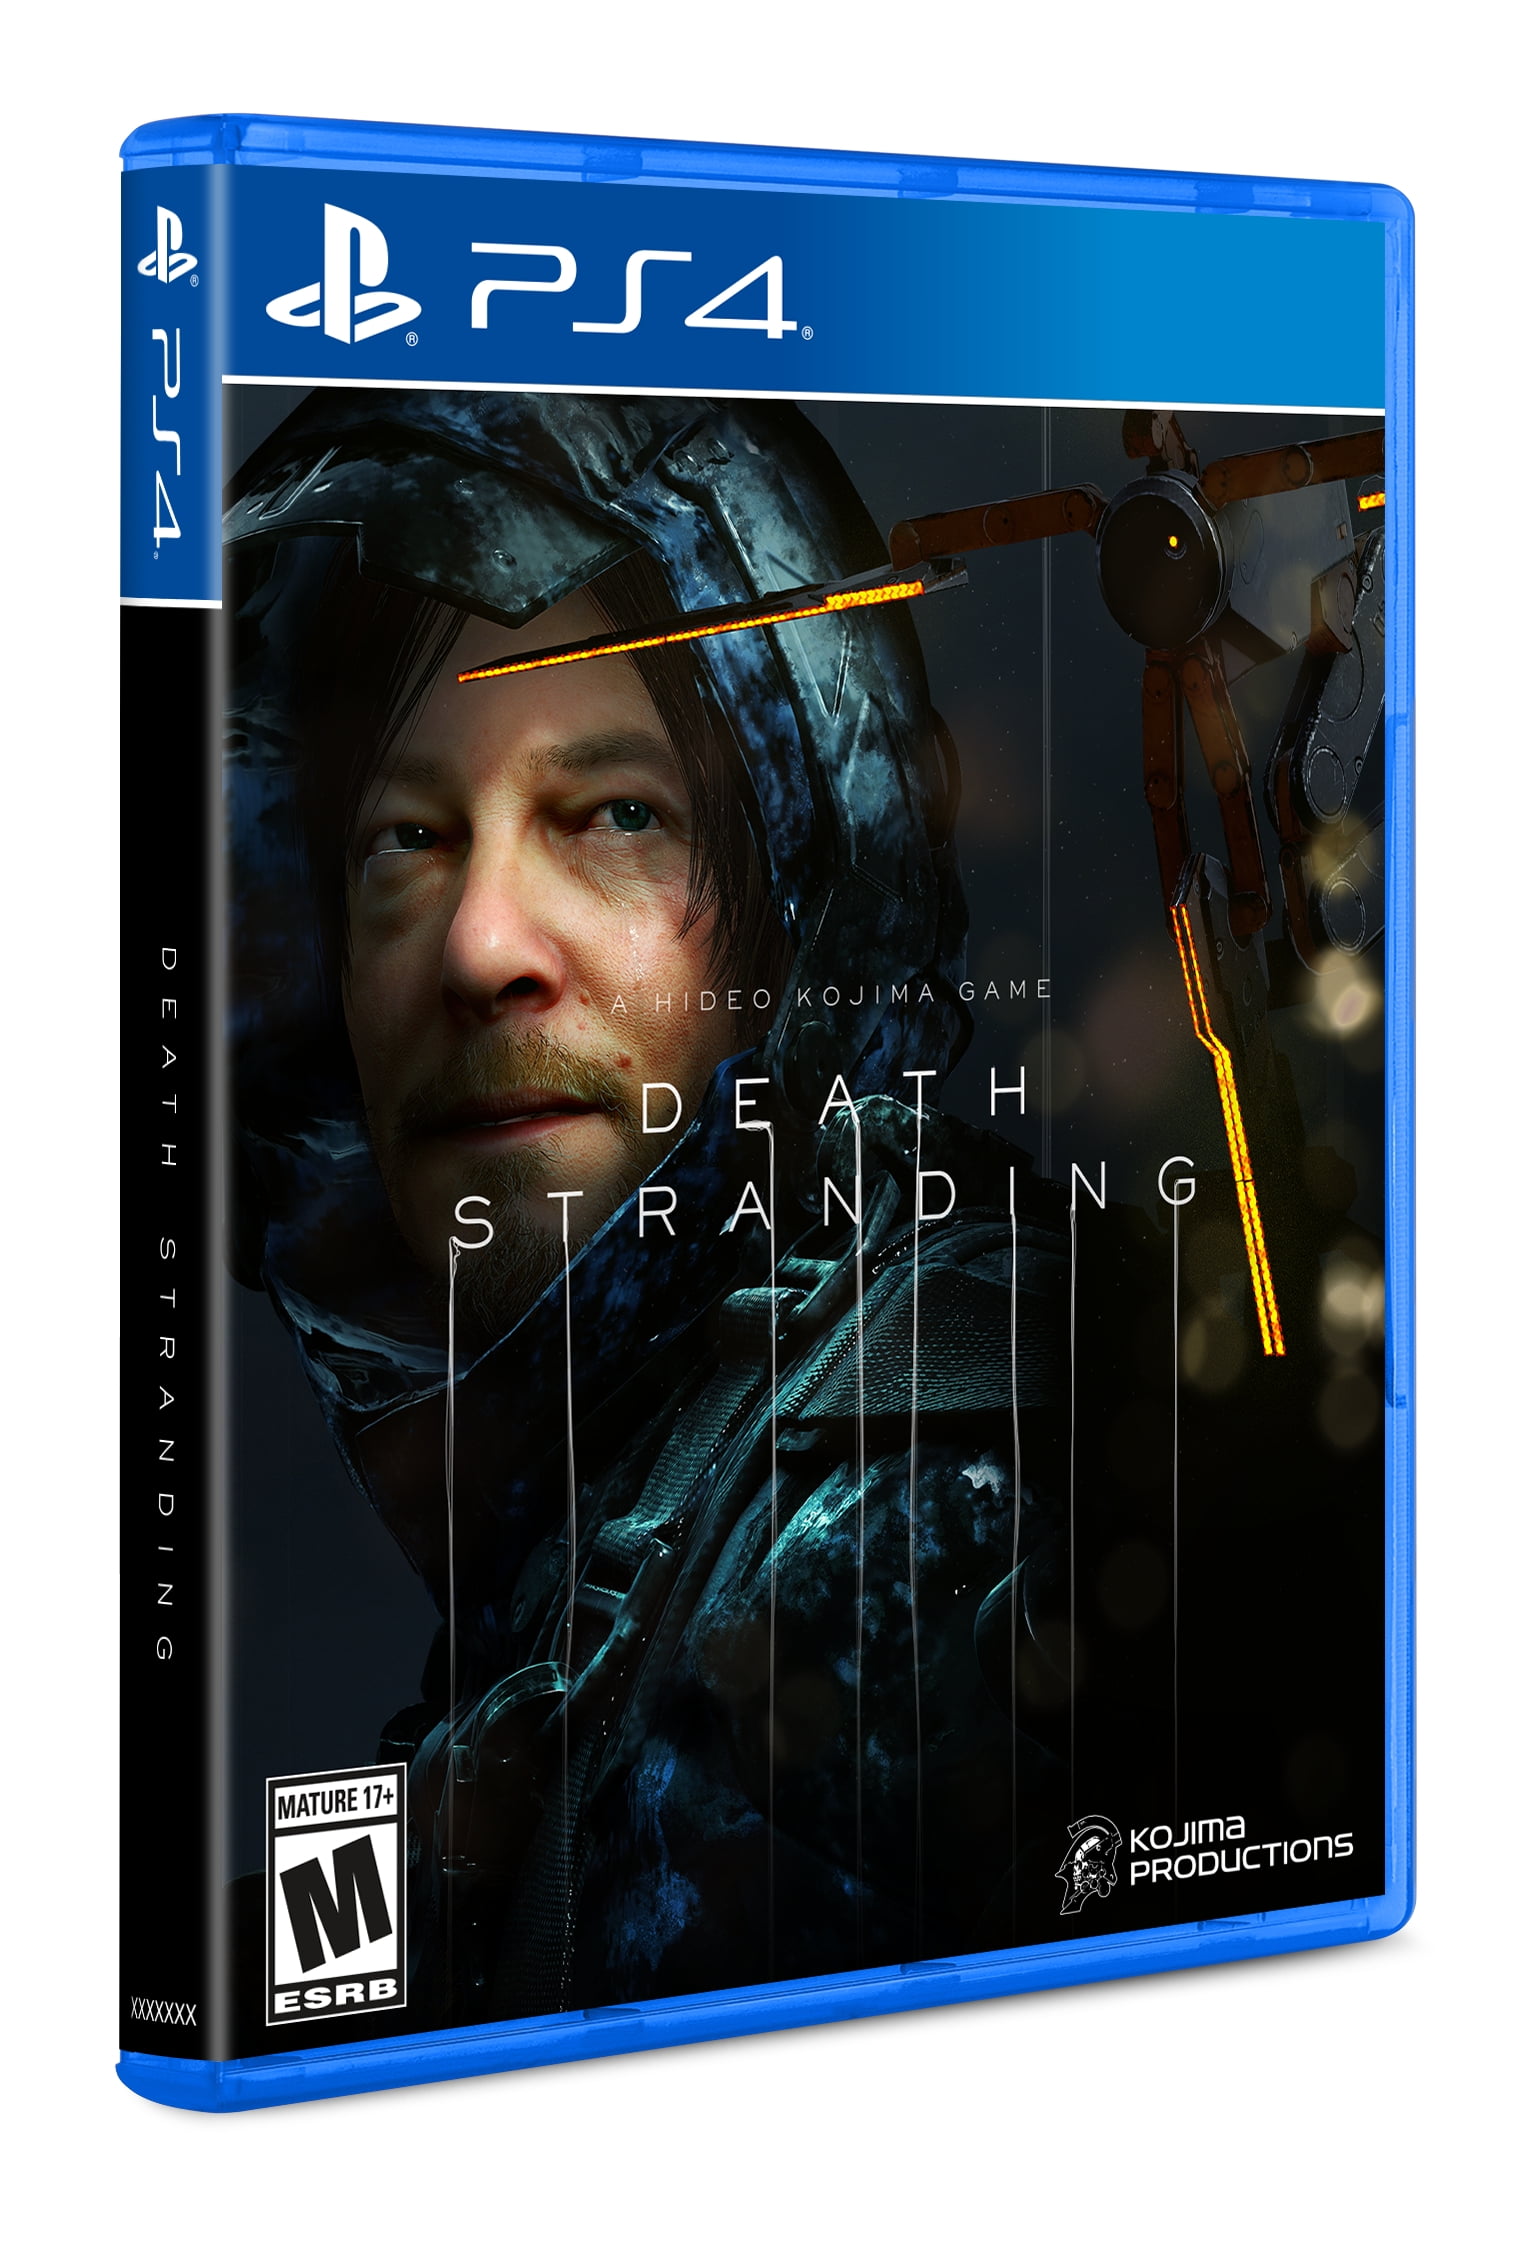 Death Stranding PS4 PS3 XBOX ONE Premium POSTER MADE IN USA - EXT616